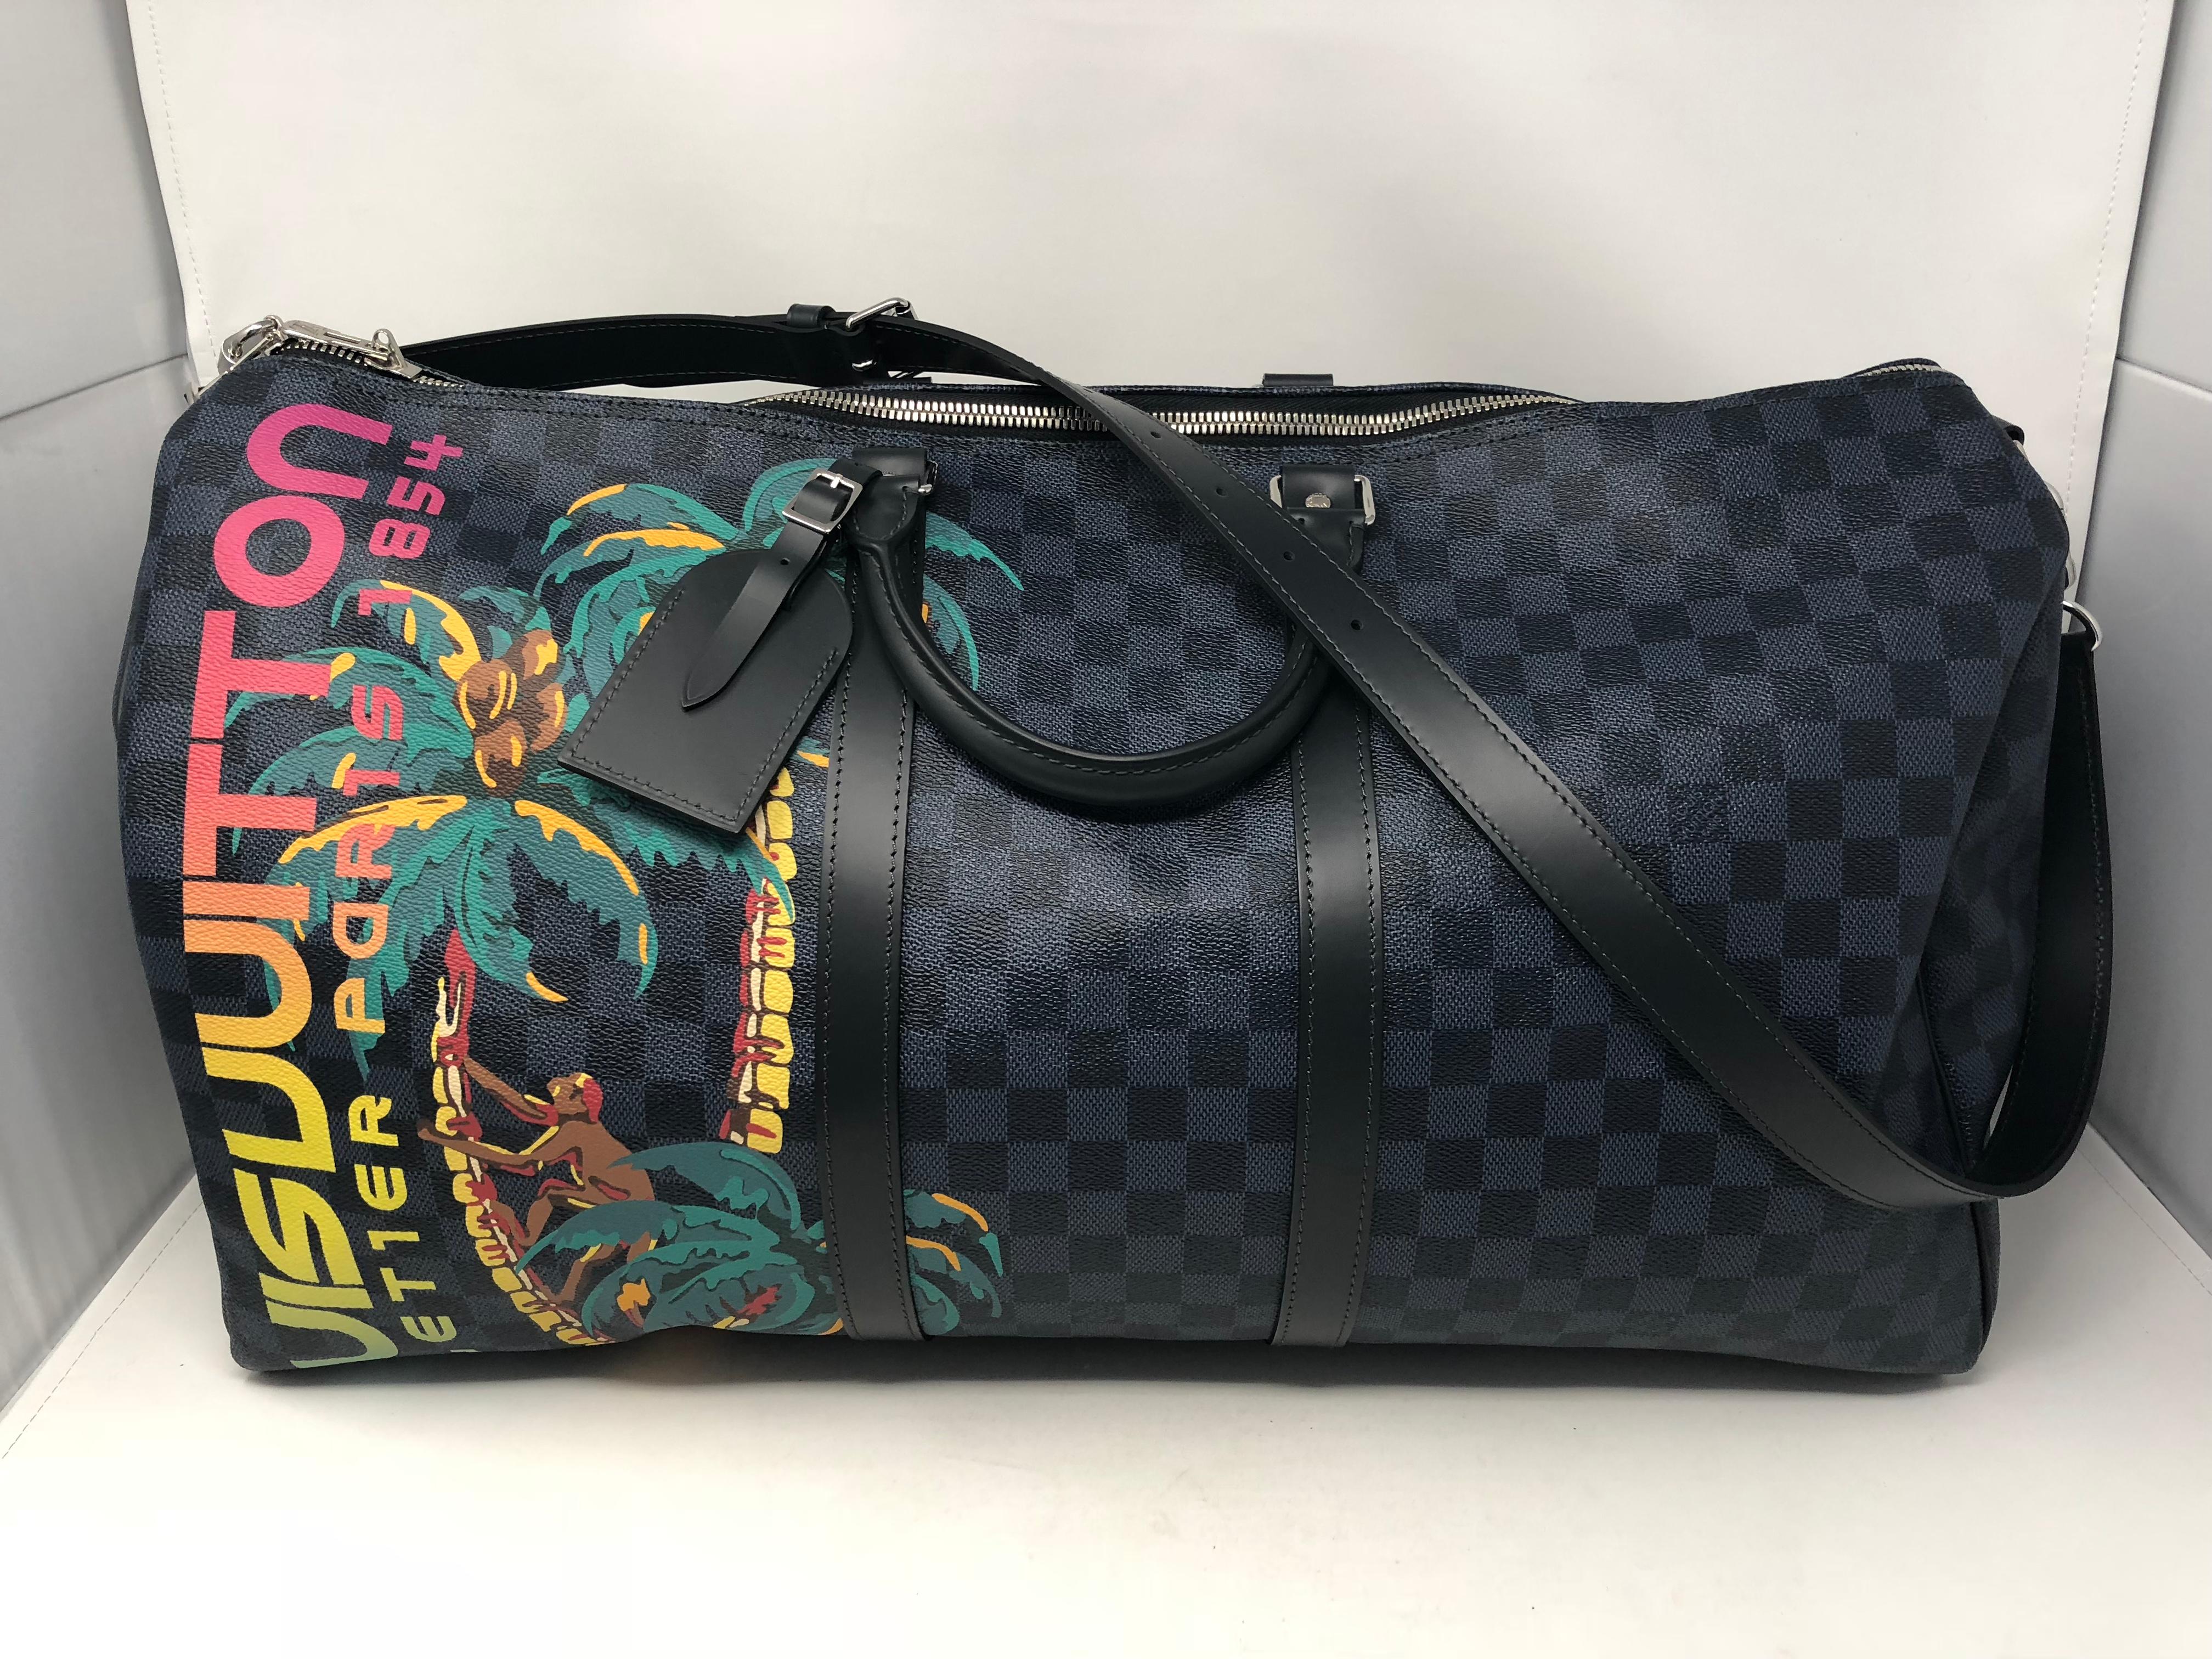 Louis Vuitton Bandouliere 55 in Damier Cobalt Canvas. From the 2018 Spring/ Summer Men's Fashion Show and one of Kim Jones last designs. The Jungle theme shows a playful monkey on a palm tree with LV in rainbow signature. Leave it to LV for artistry